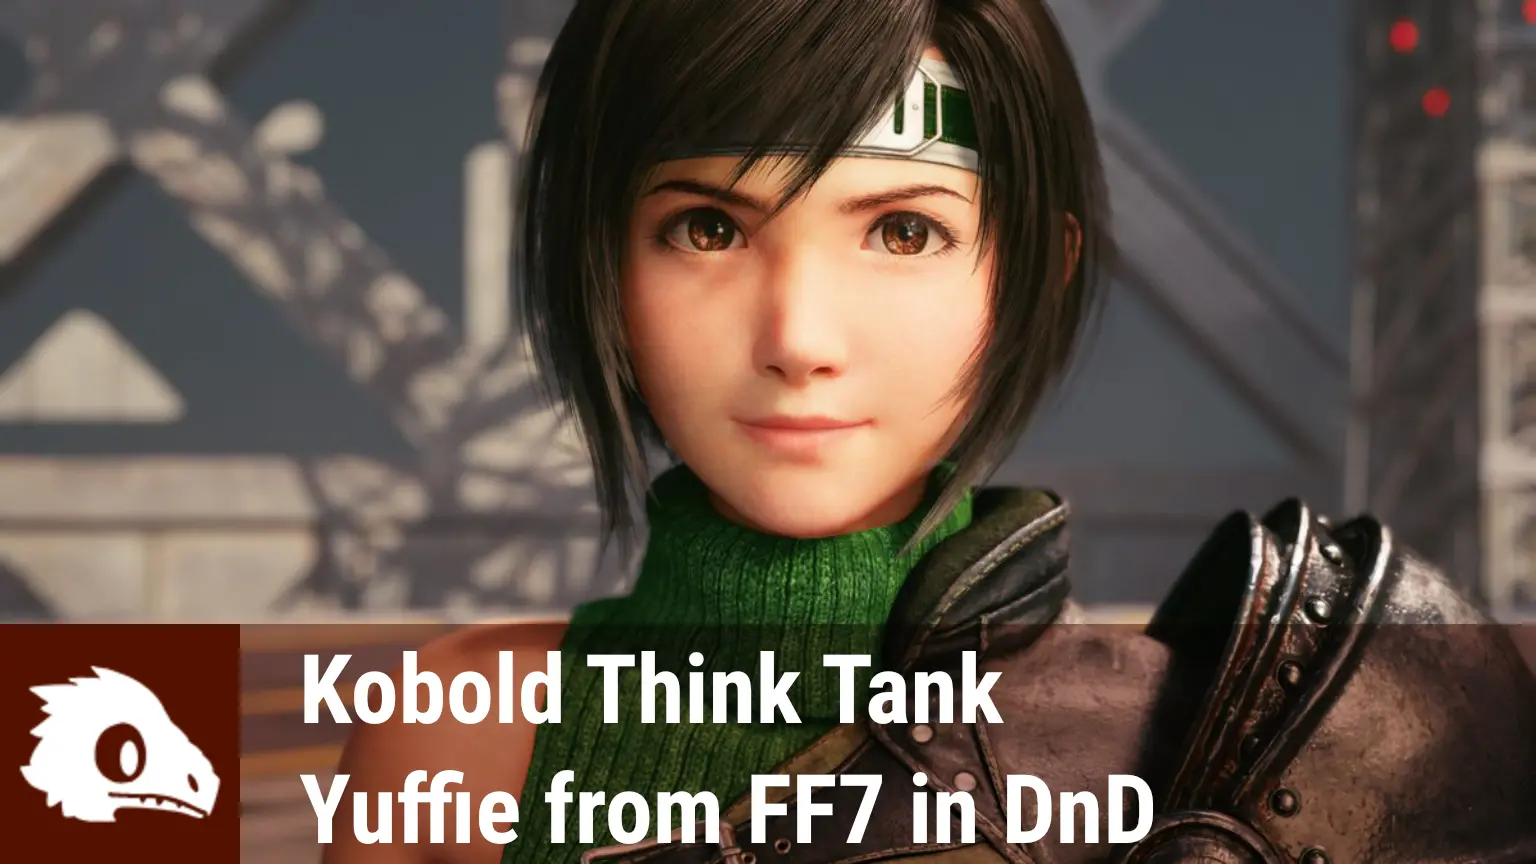 Graphic of Yuffie Kisaragi from Final Fantasy VII